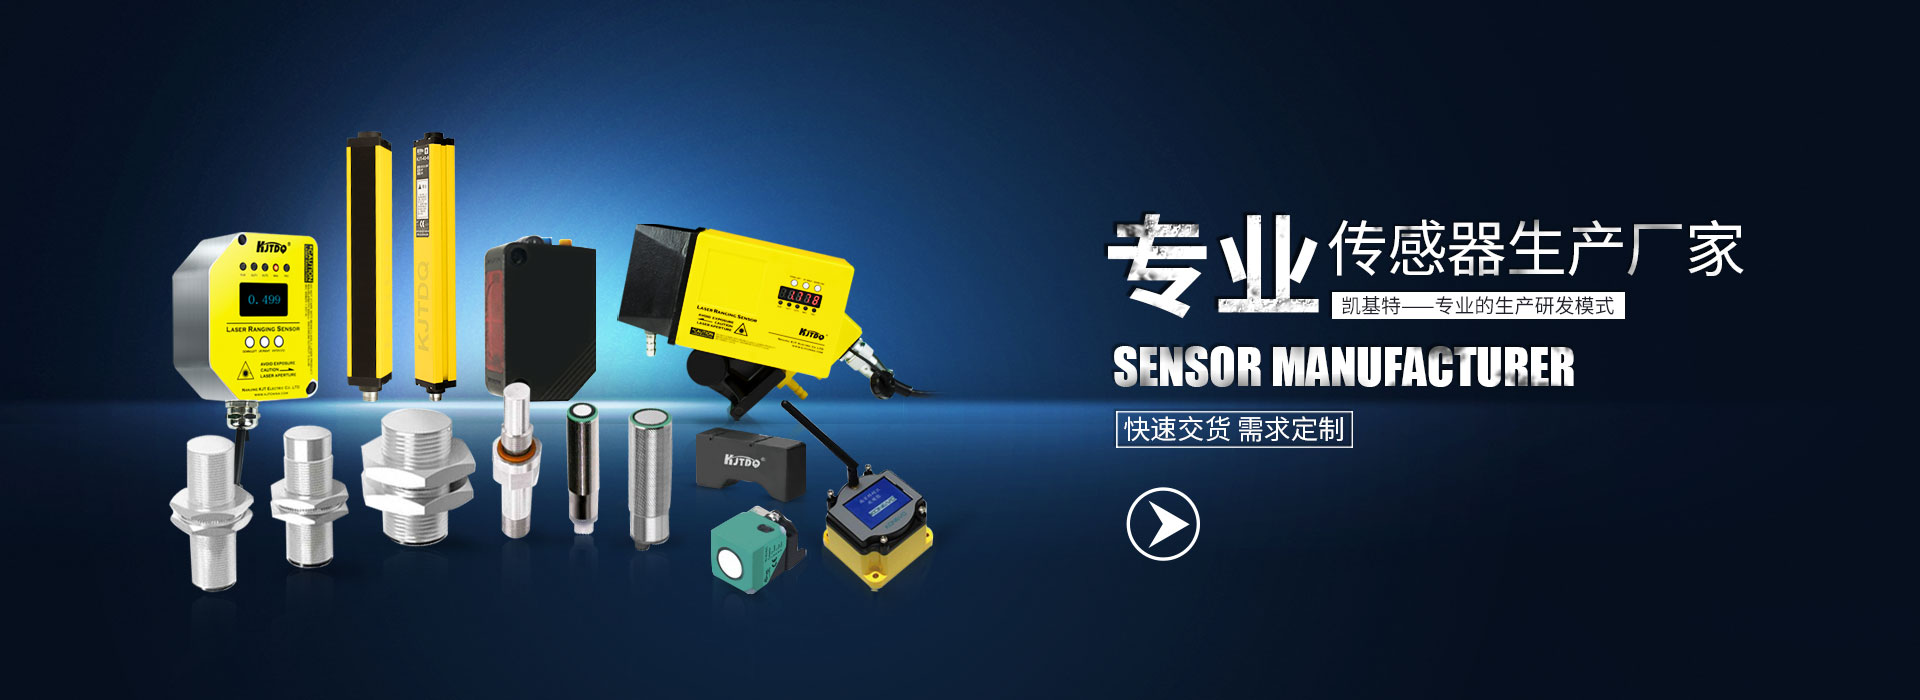 What types of limit proximity sensors are there?